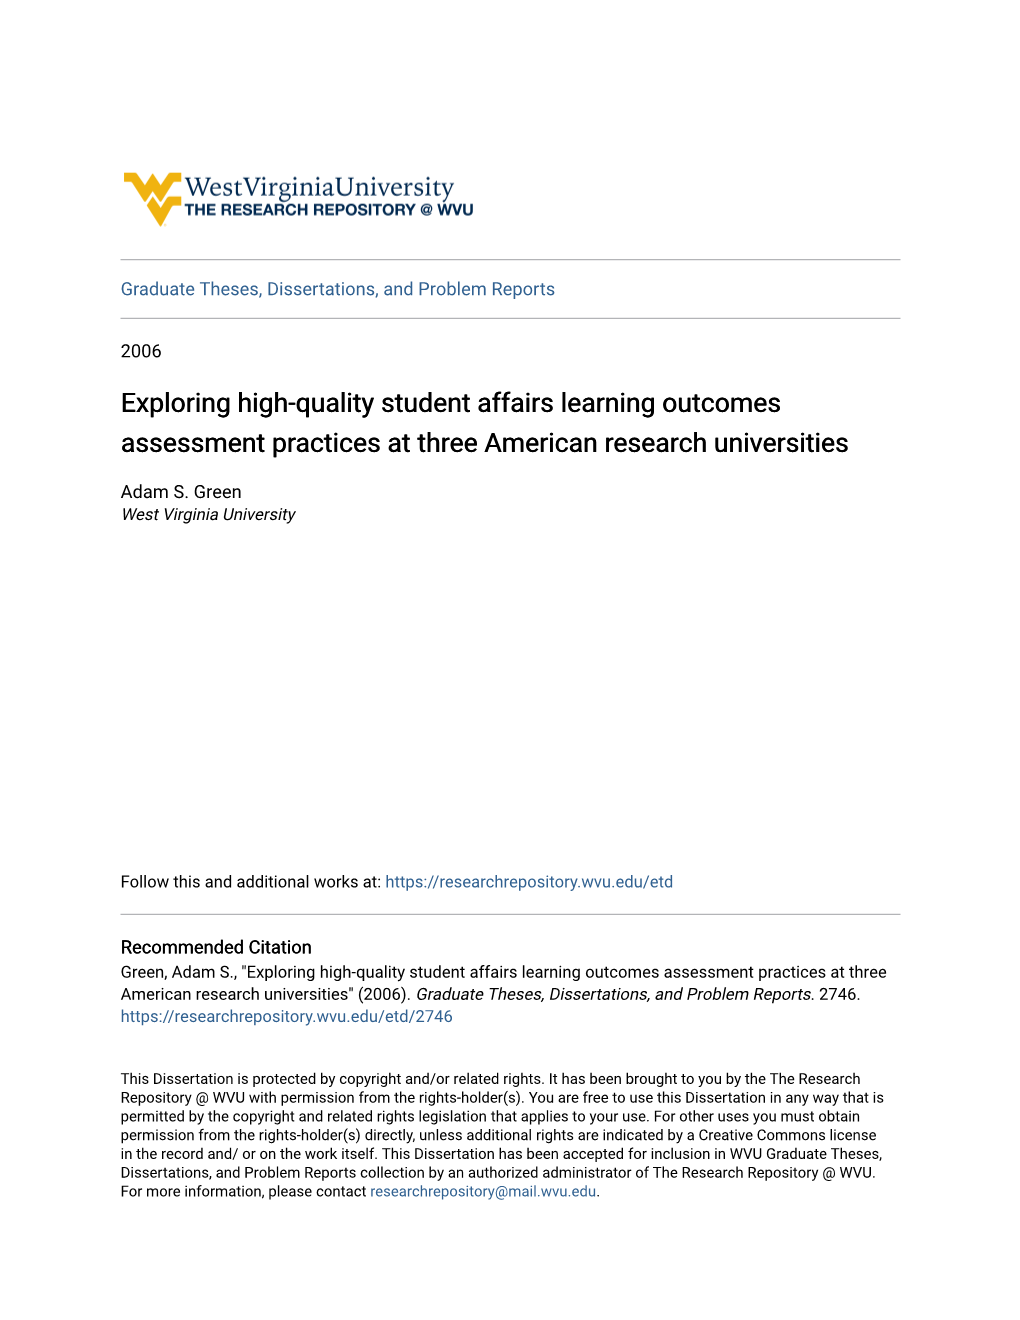 Exploring High-Quality Student Affairs Learning Outcomes Assessment Practices at Three American Research Universities